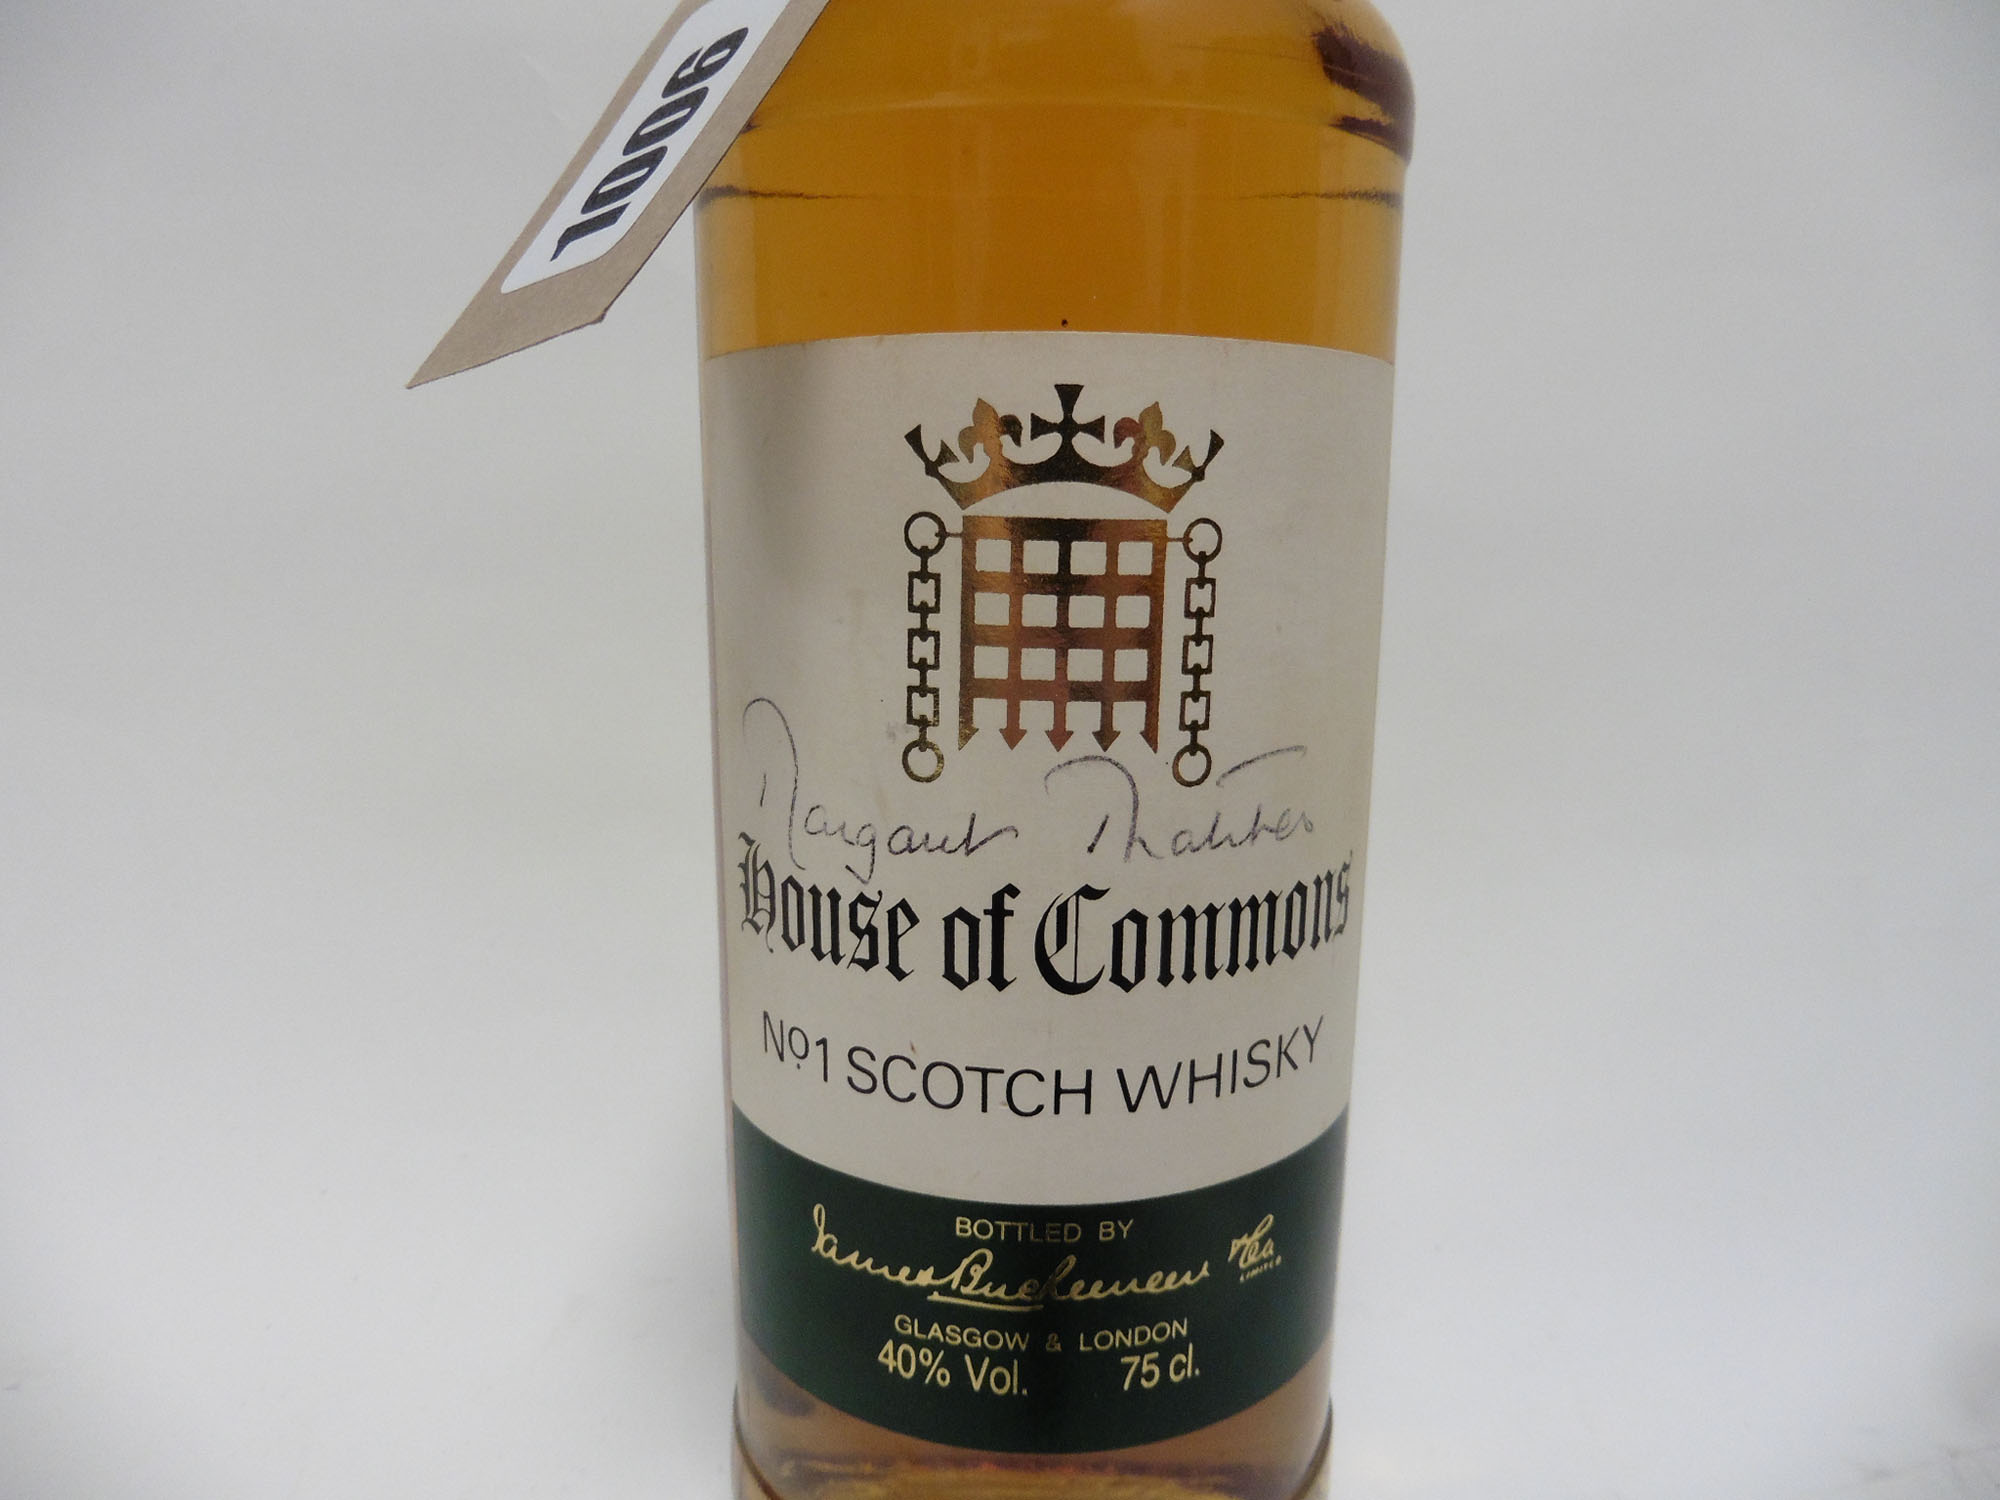 A bottle of House of Commons No1 Scotch Whisky by James Buchanan circa 1980's bearing signature - Image 2 of 3